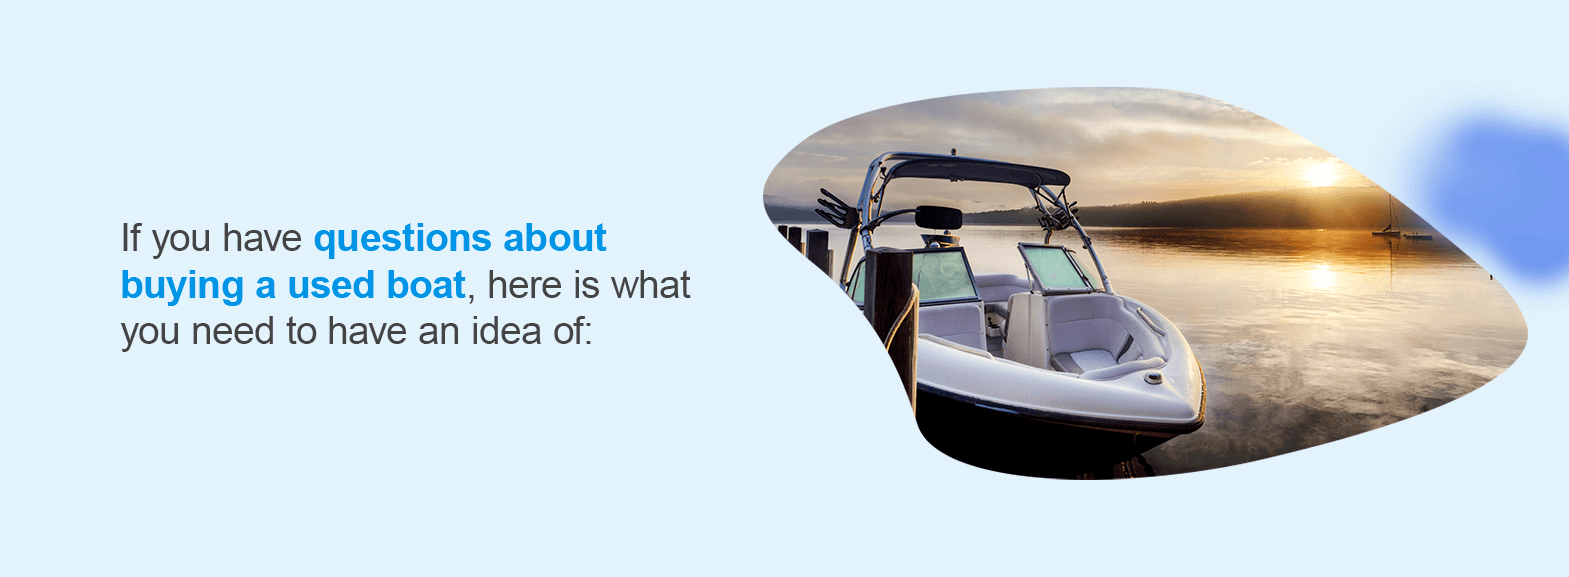 Questions to Ask When Buying a Used Boat. If you have questions about buying a used boat, here is what you need to have an idea of: